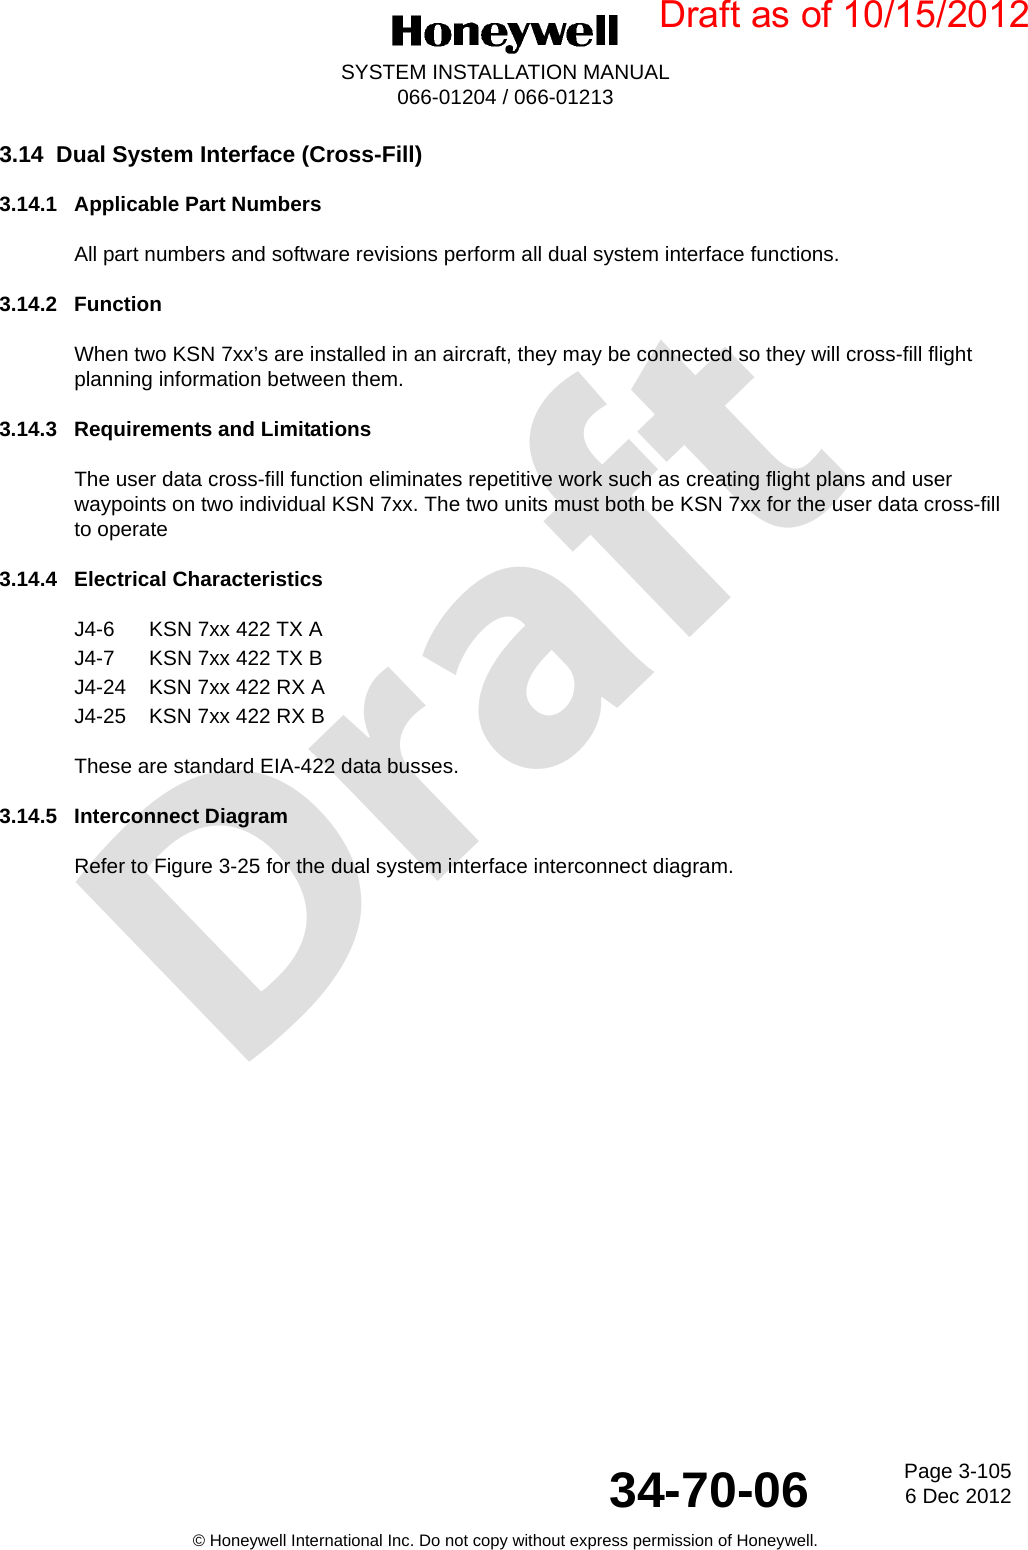 DraftPage 3-1056 Dec 201234-70-06SYSTEM INSTALLATION MANUAL066-01204 / 066-01213© Honeywell International Inc. Do not copy without express permission of Honeywell.3.14 Dual System Interface (Cross-Fill)3.14.1 Applicable Part NumbersAll part numbers and software revisions perform all dual system interface functions.3.14.2 FunctionWhen two KSN 7xx’s are installed in an aircraft, they may be connected so they will cross-fill flight planning information between them.3.14.3 Requirements and LimitationsThe user data cross-fill function eliminates repetitive work such as creating flight plans and user waypoints on two individual KSN 7xx. The two units must both be KSN 7xx for the user data cross-fill to operate3.14.4 Electrical CharacteristicsJ4-6 KSN 7xx 422 TX AJ4-7 KSN 7xx 422 TX BJ4-24 KSN 7xx 422 RX AJ4-25 KSN 7xx 422 RX BThese are standard EIA-422 data busses.3.14.5 Interconnect DiagramRefer to Figure 3-25 for the dual system interface interconnect diagram.Draft as of 10/15/2012